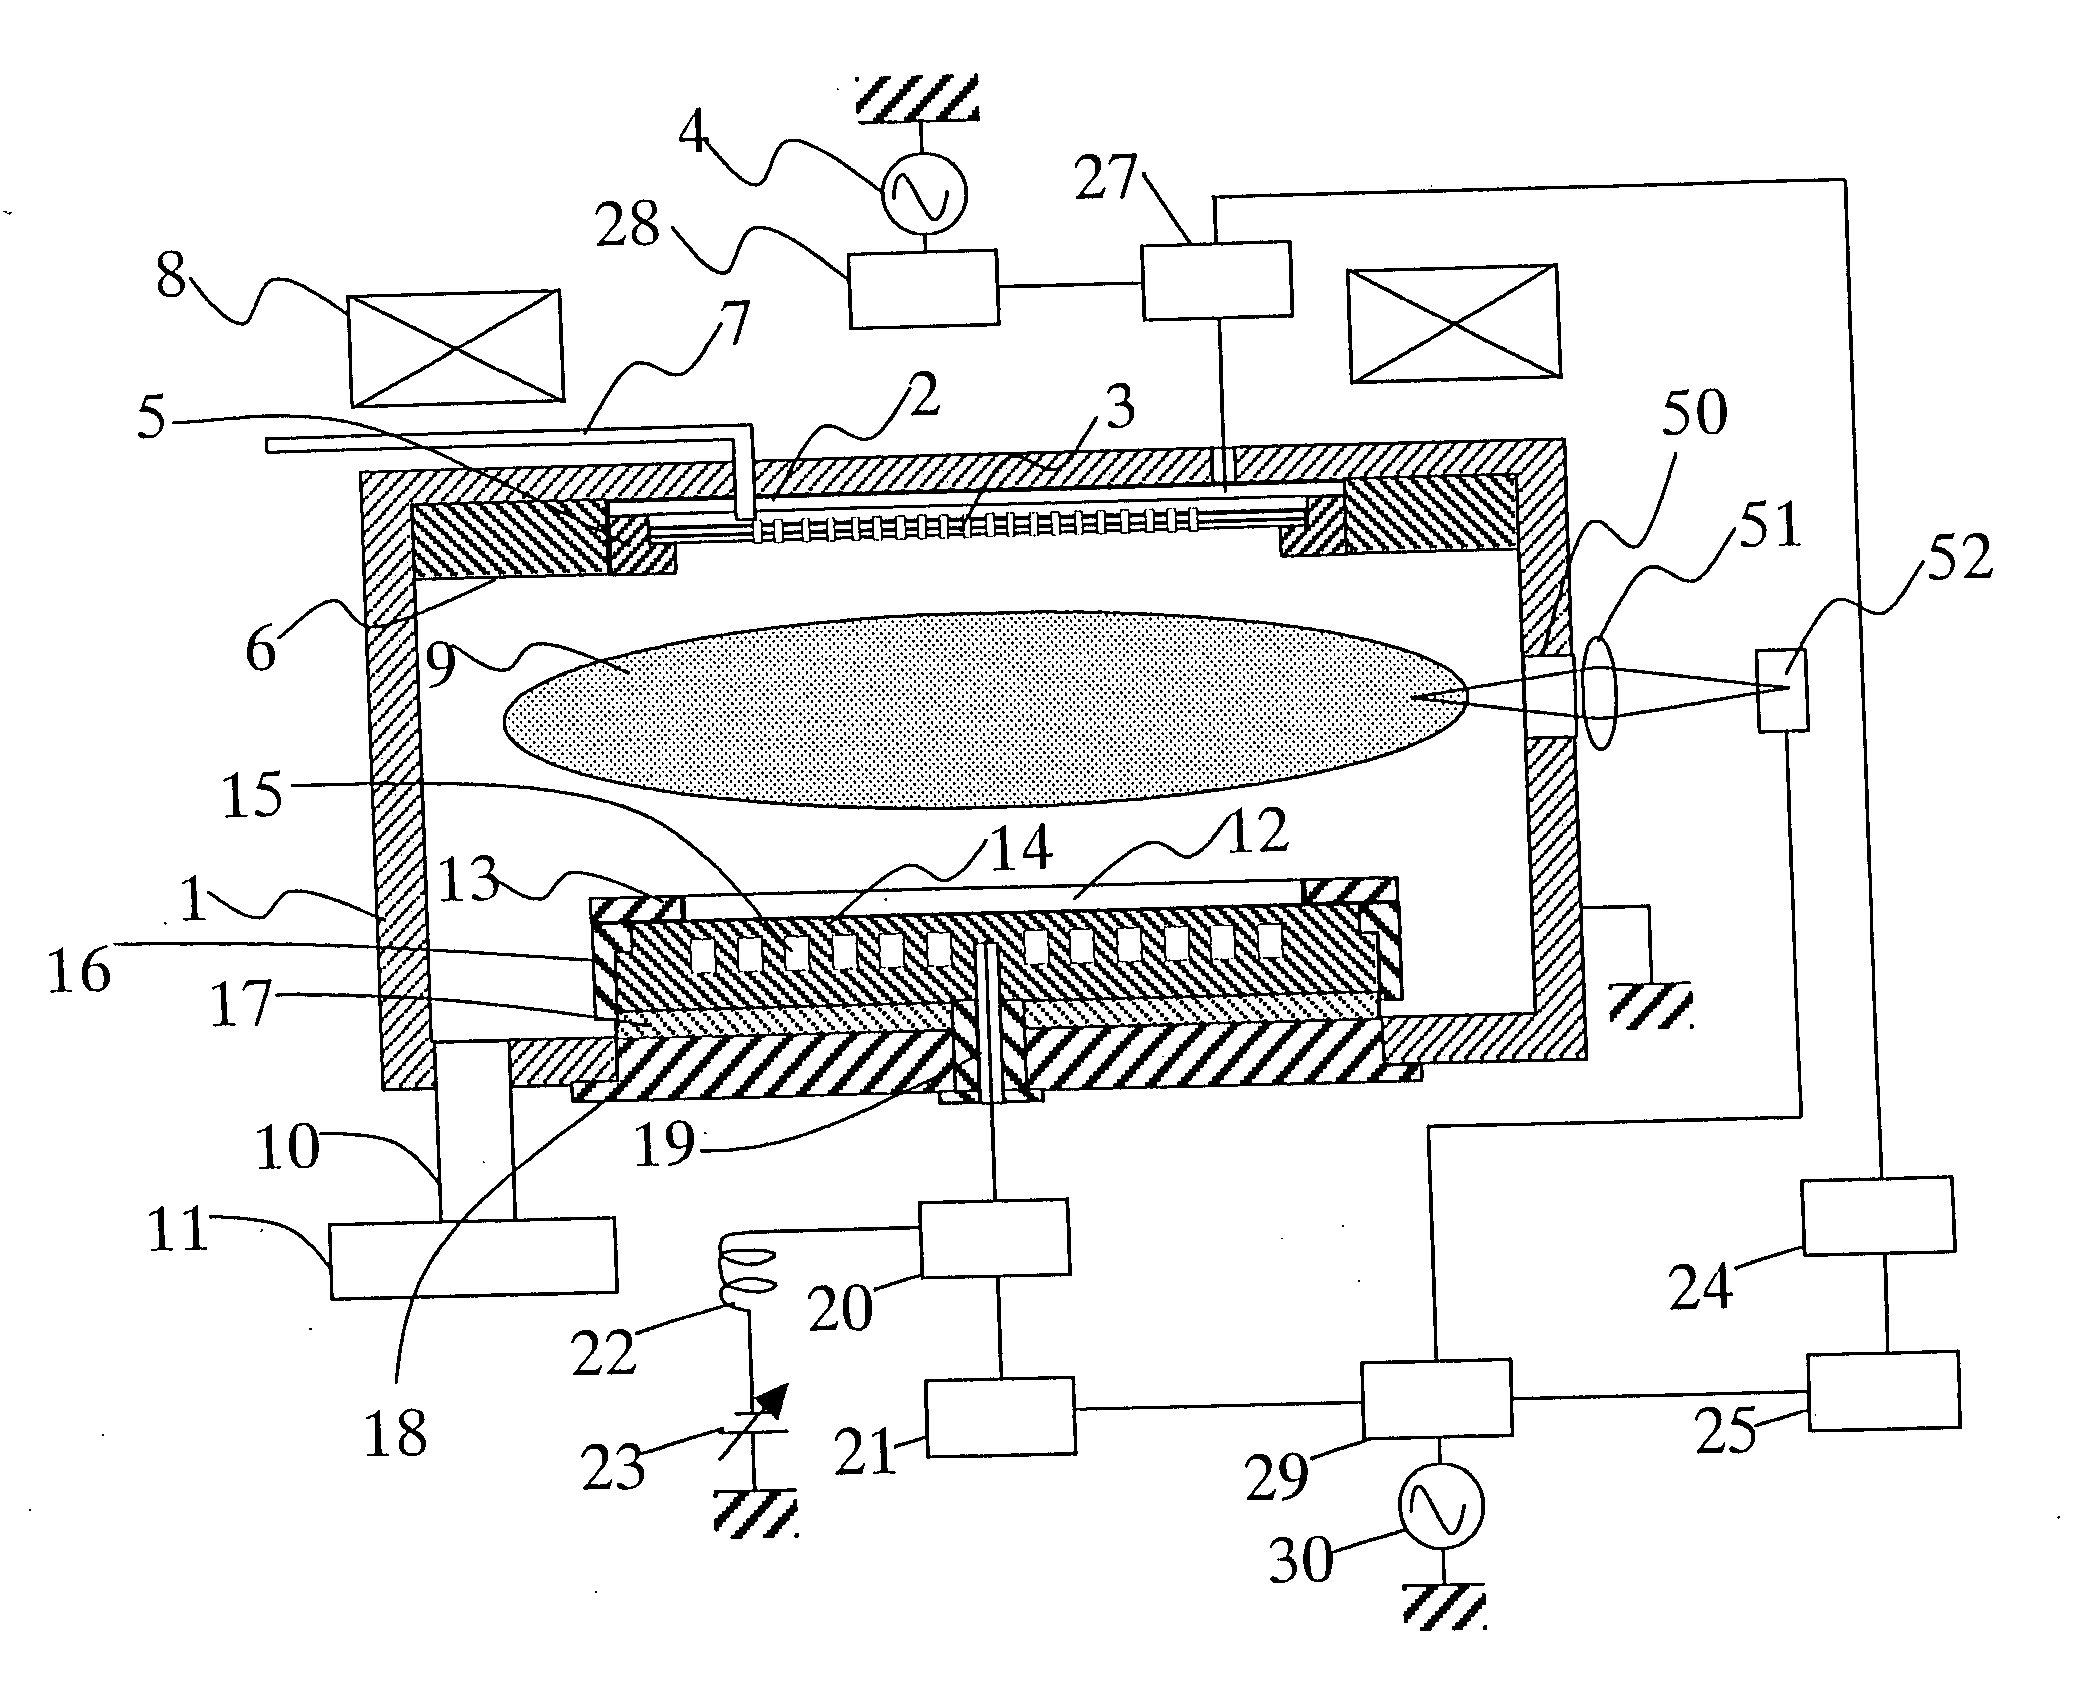 Plasma processing apparatus and method for controlling the same